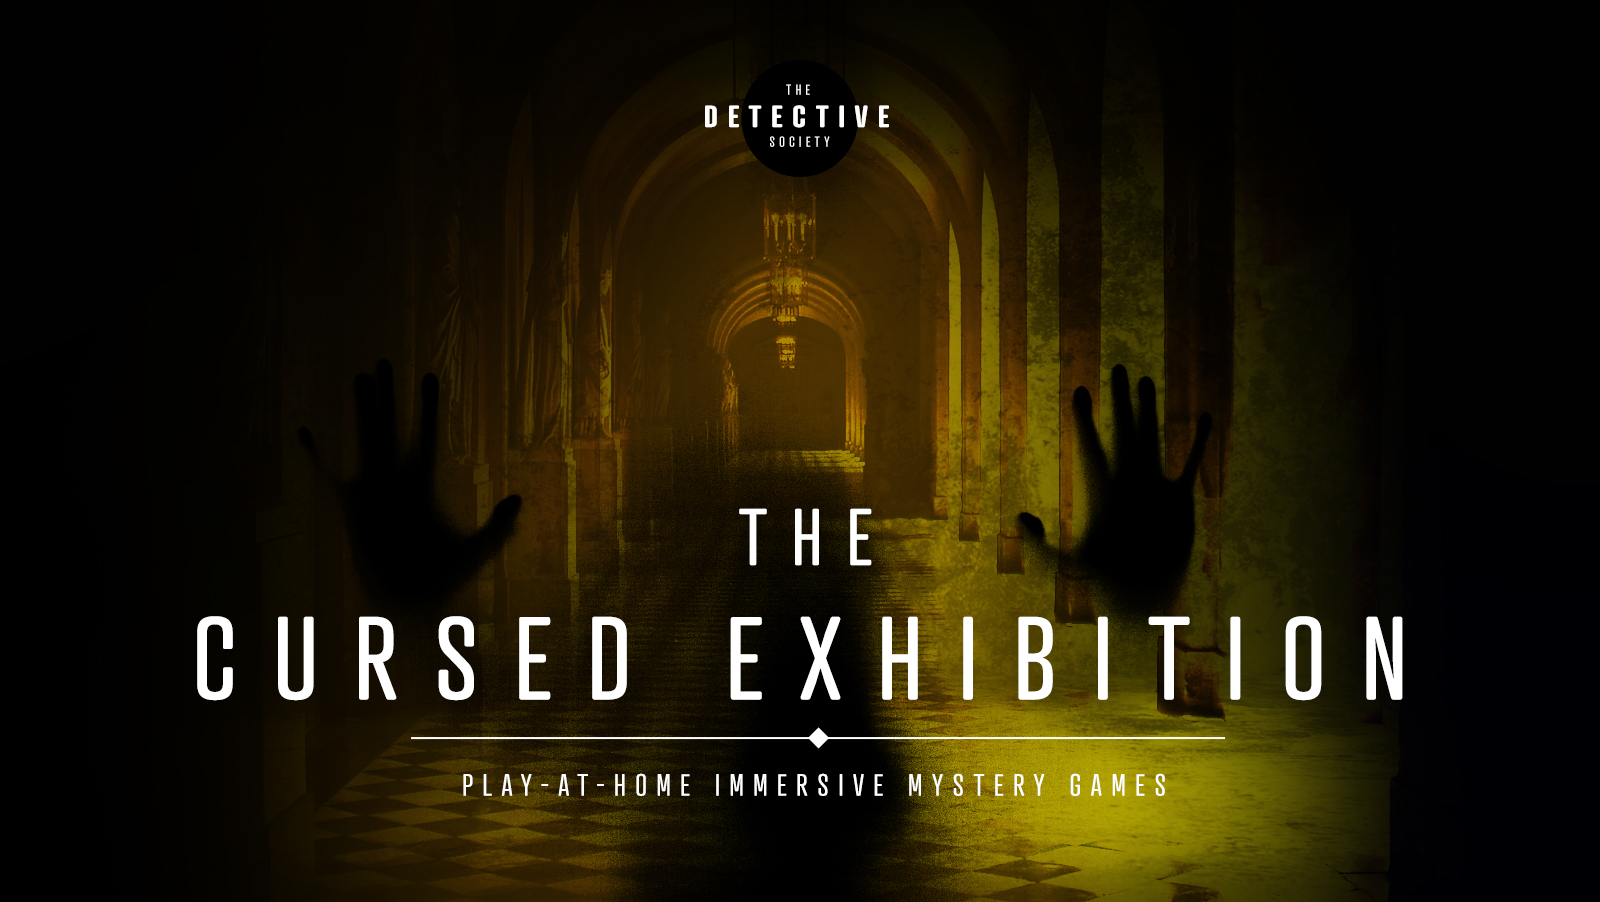 The Cursed Exhibition